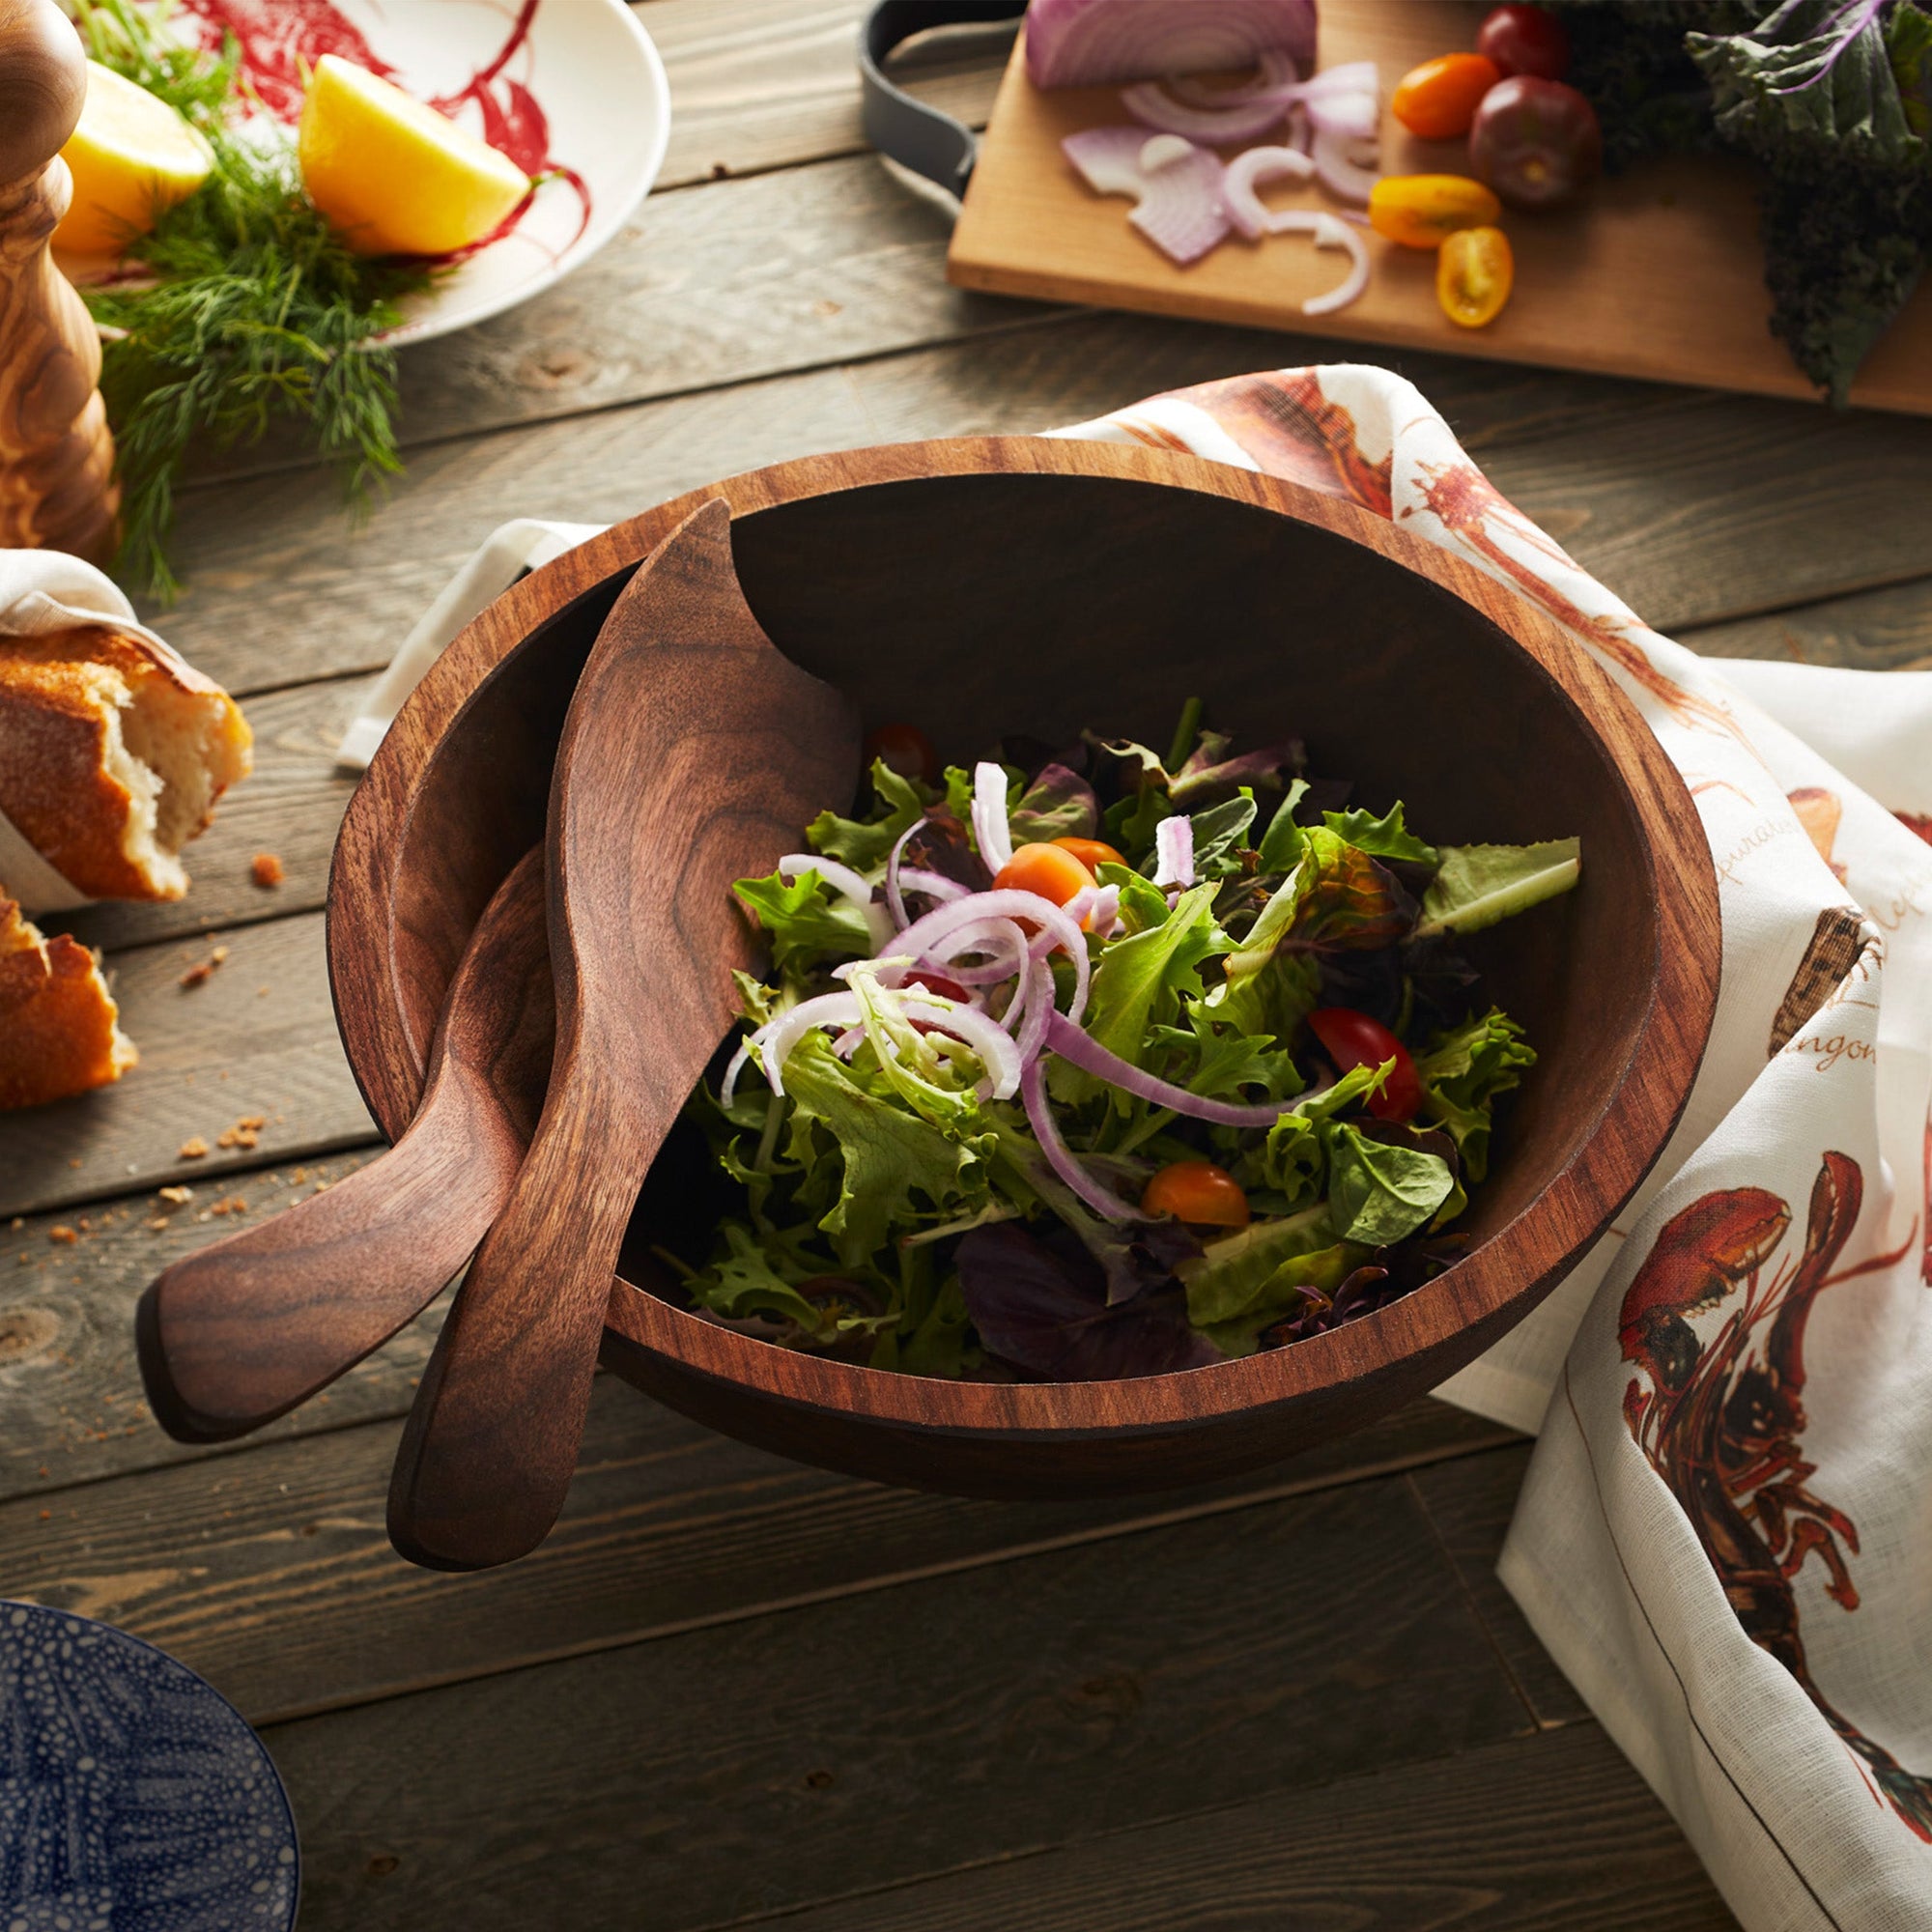 A Peterman's Black Walnut 13" Handcrafted Serving Bowl with a salad in it crafted by an artisan woodworker.